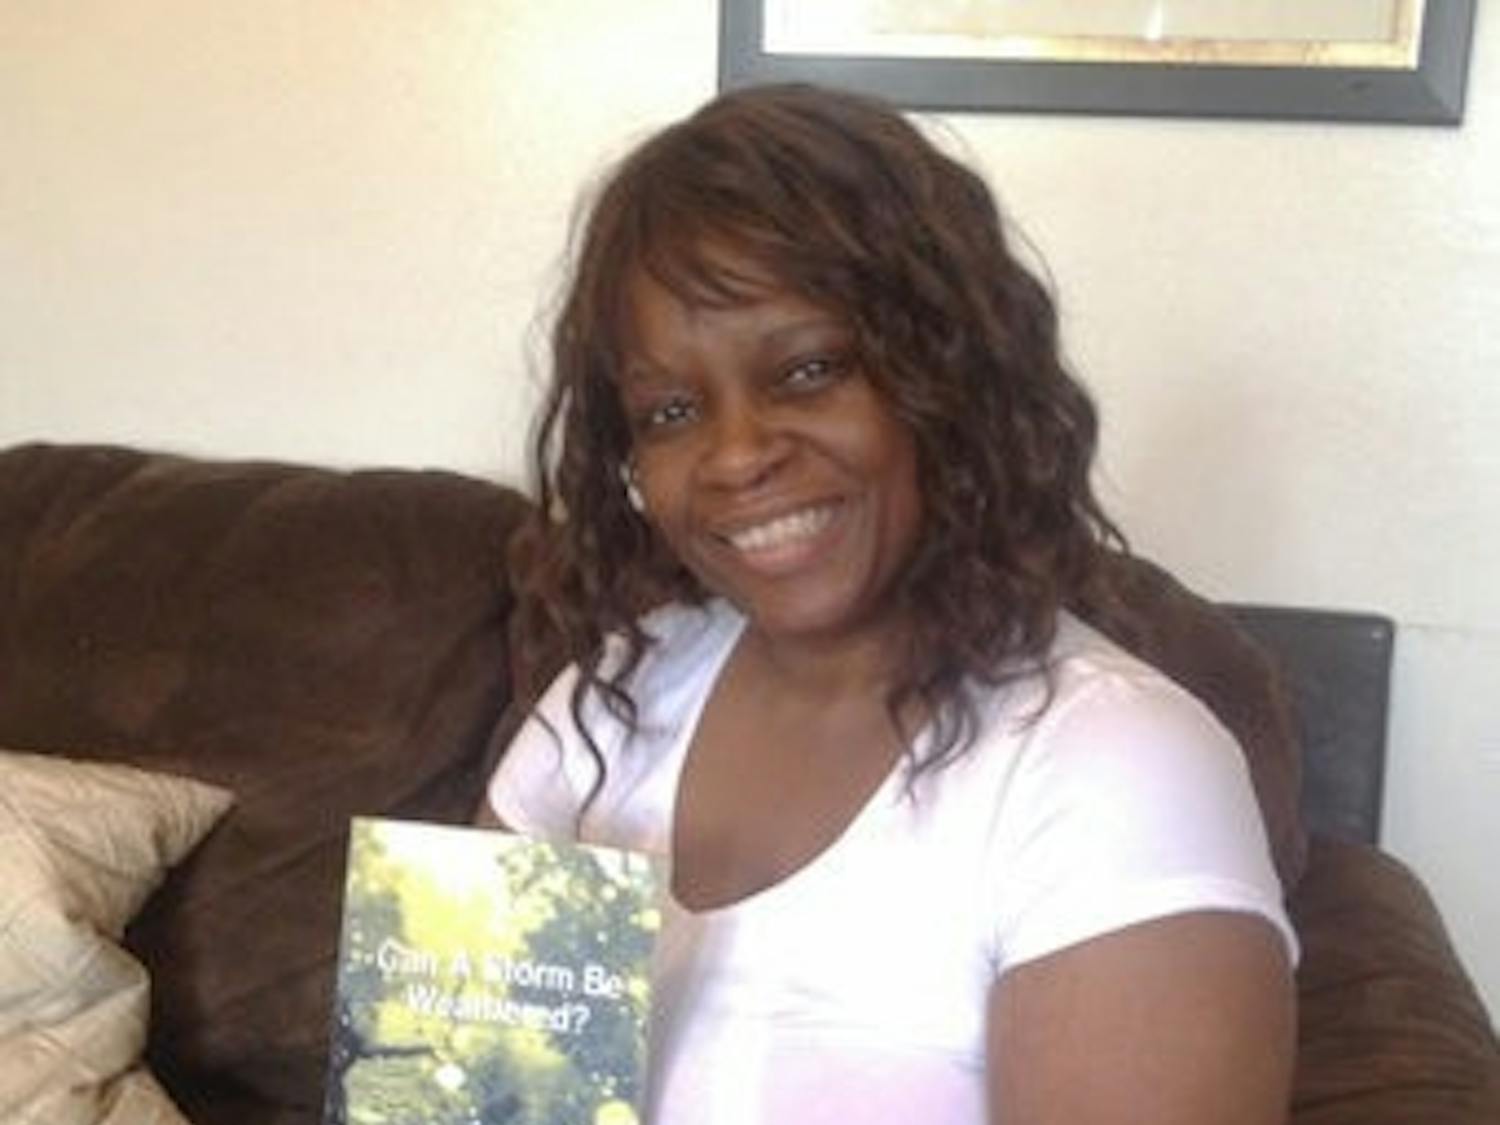 Tangela Johnson sits in her home with her book "Can a Storm be Weathered? Memoirs of a Broken Past."